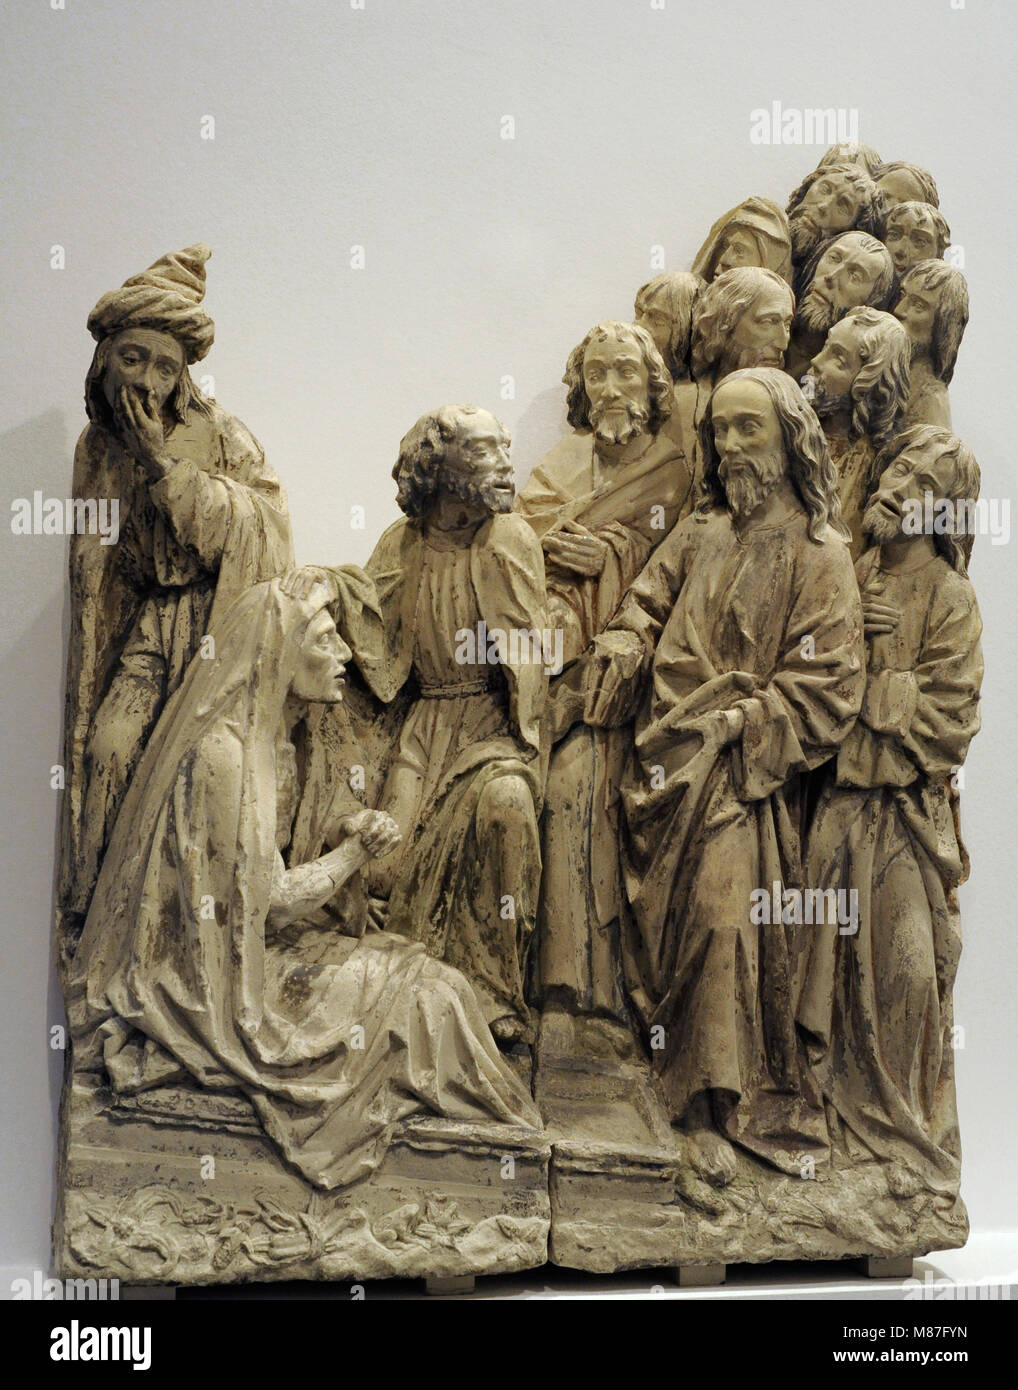 The Raising of St. Lazarus. Sculptural group. Workshop of Heinrich Brabender, Westphalia, 1510-1520. Baumberg sandstone with traces of polychromy. Schnütgen Museum. Cologne, Germany. Stock Photo